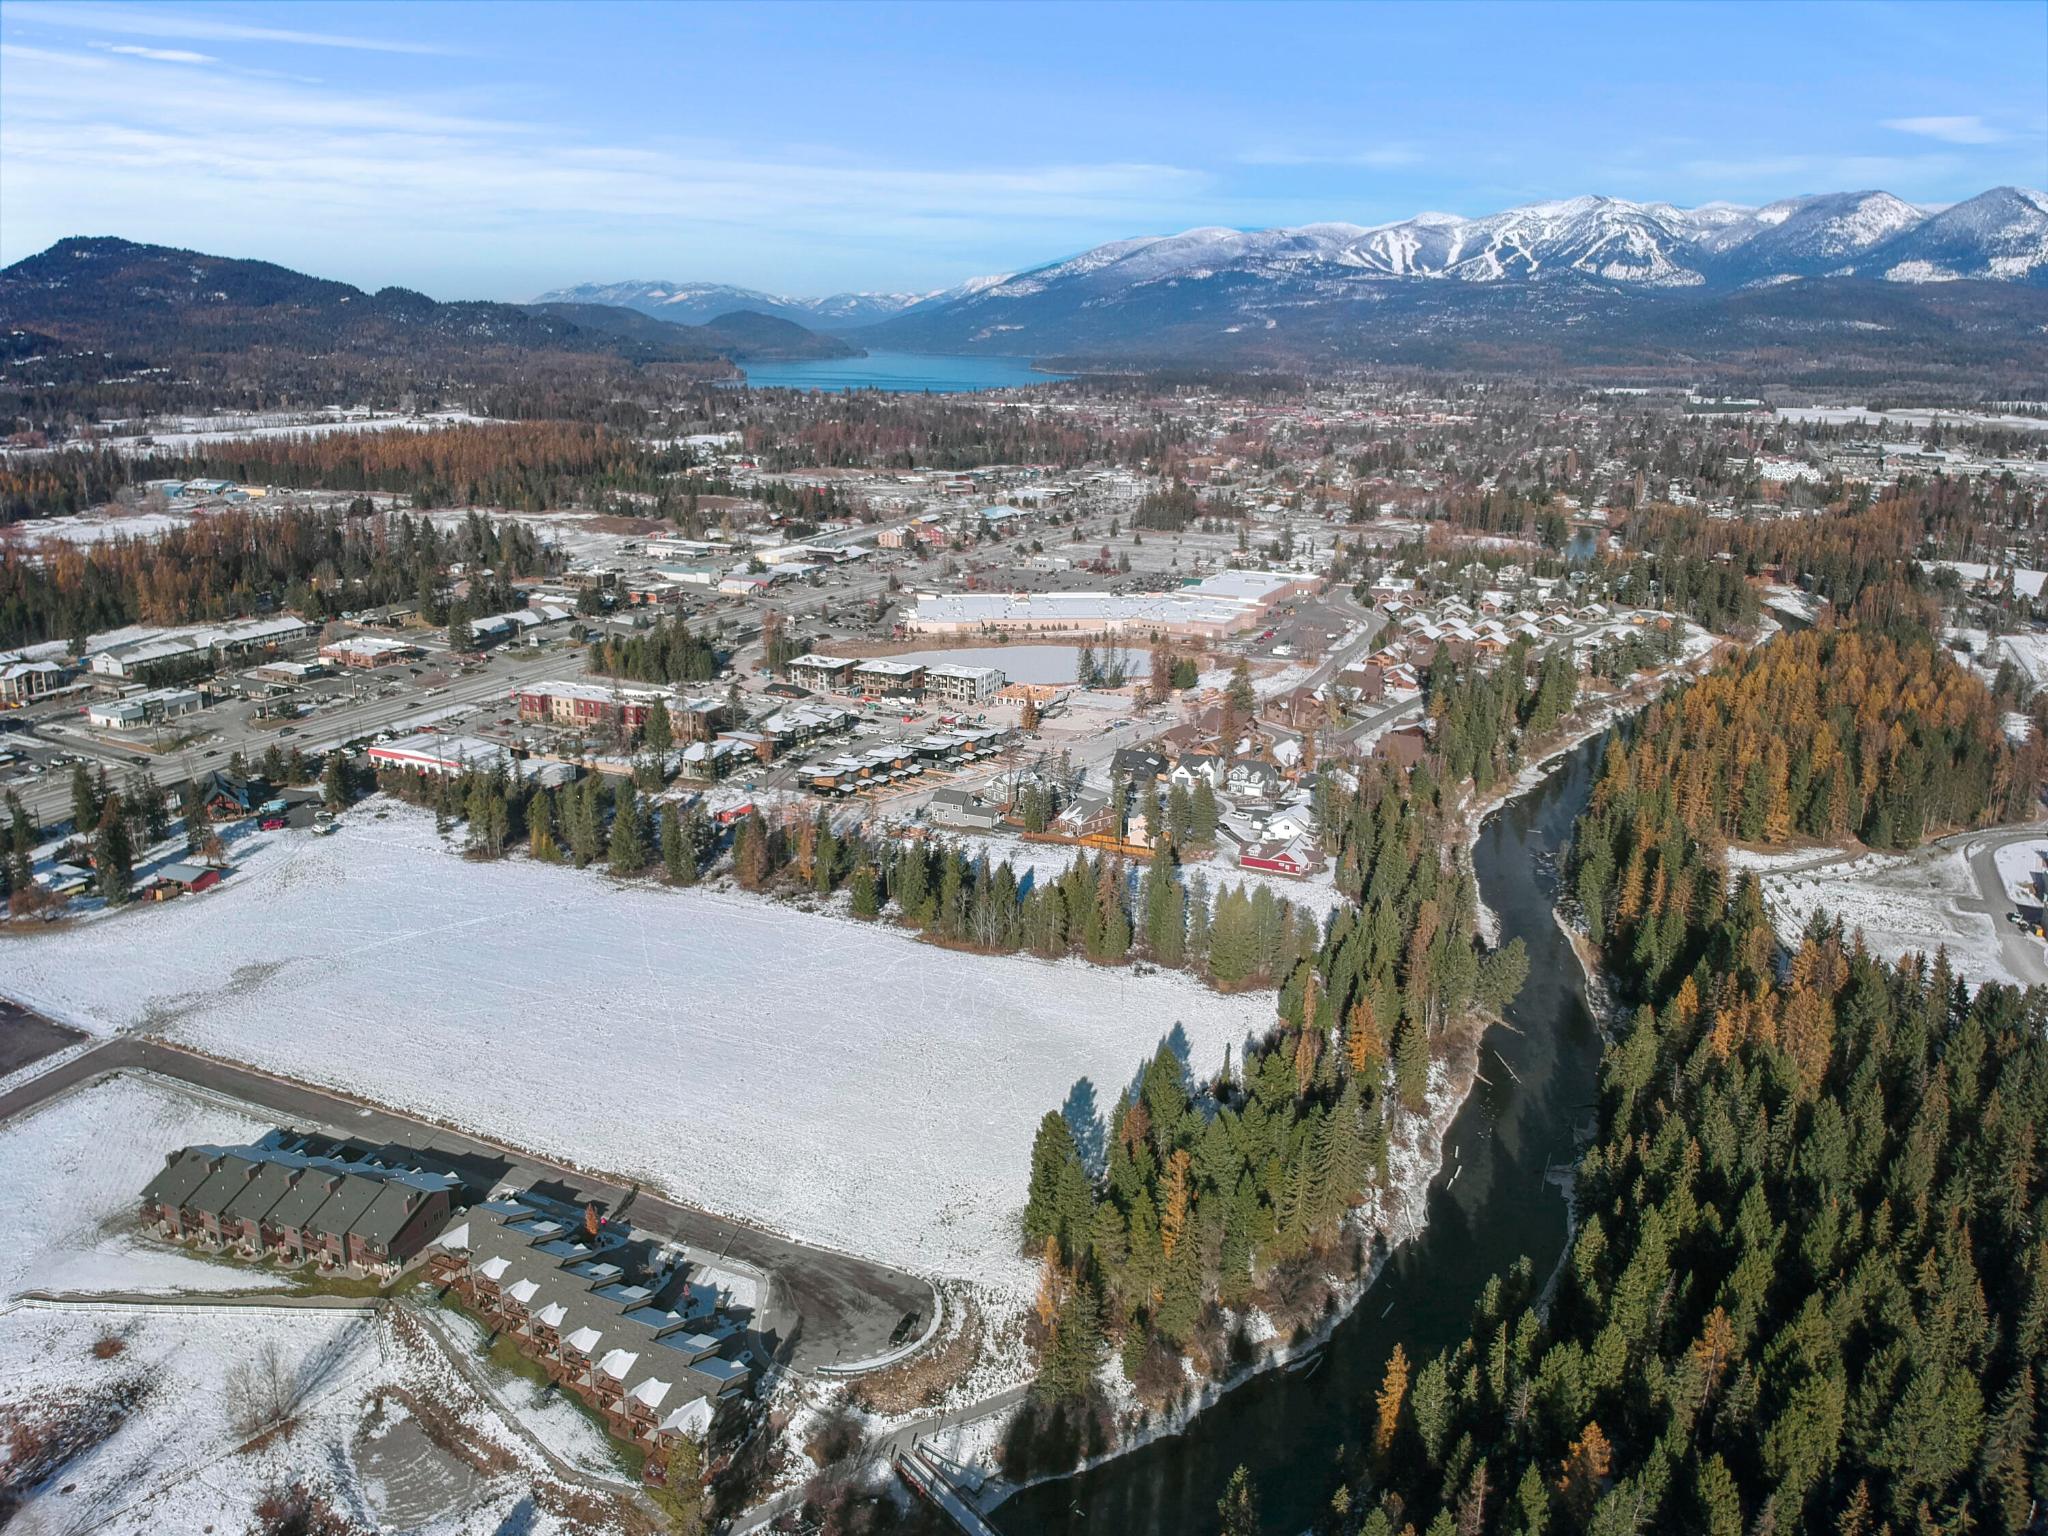 Welcome to Snowy Mountain, Whitefish's newest premier planned development community, along the banks of the gorgeous Whitefish River. With 24 duplex townhome lots, future homeowners will be well positioned to access all of Whitefish and the Flathead Valley. At just under 1/4 acre, lot 23 borders the Whitefish Riverwalk, with prime west-facing river views. Enjoy the nearby convenience of grocery stores and coffee shops. Downtown Whitefish, with its vibrant shopping and dining scene, is down the road, while the Ski Resort is 18 minutes to the Base Lodge. Construction begins this spring with a projected early Fall completion. Contact Kaleb Retz (406-546-8987) or your Real Estate Professional.